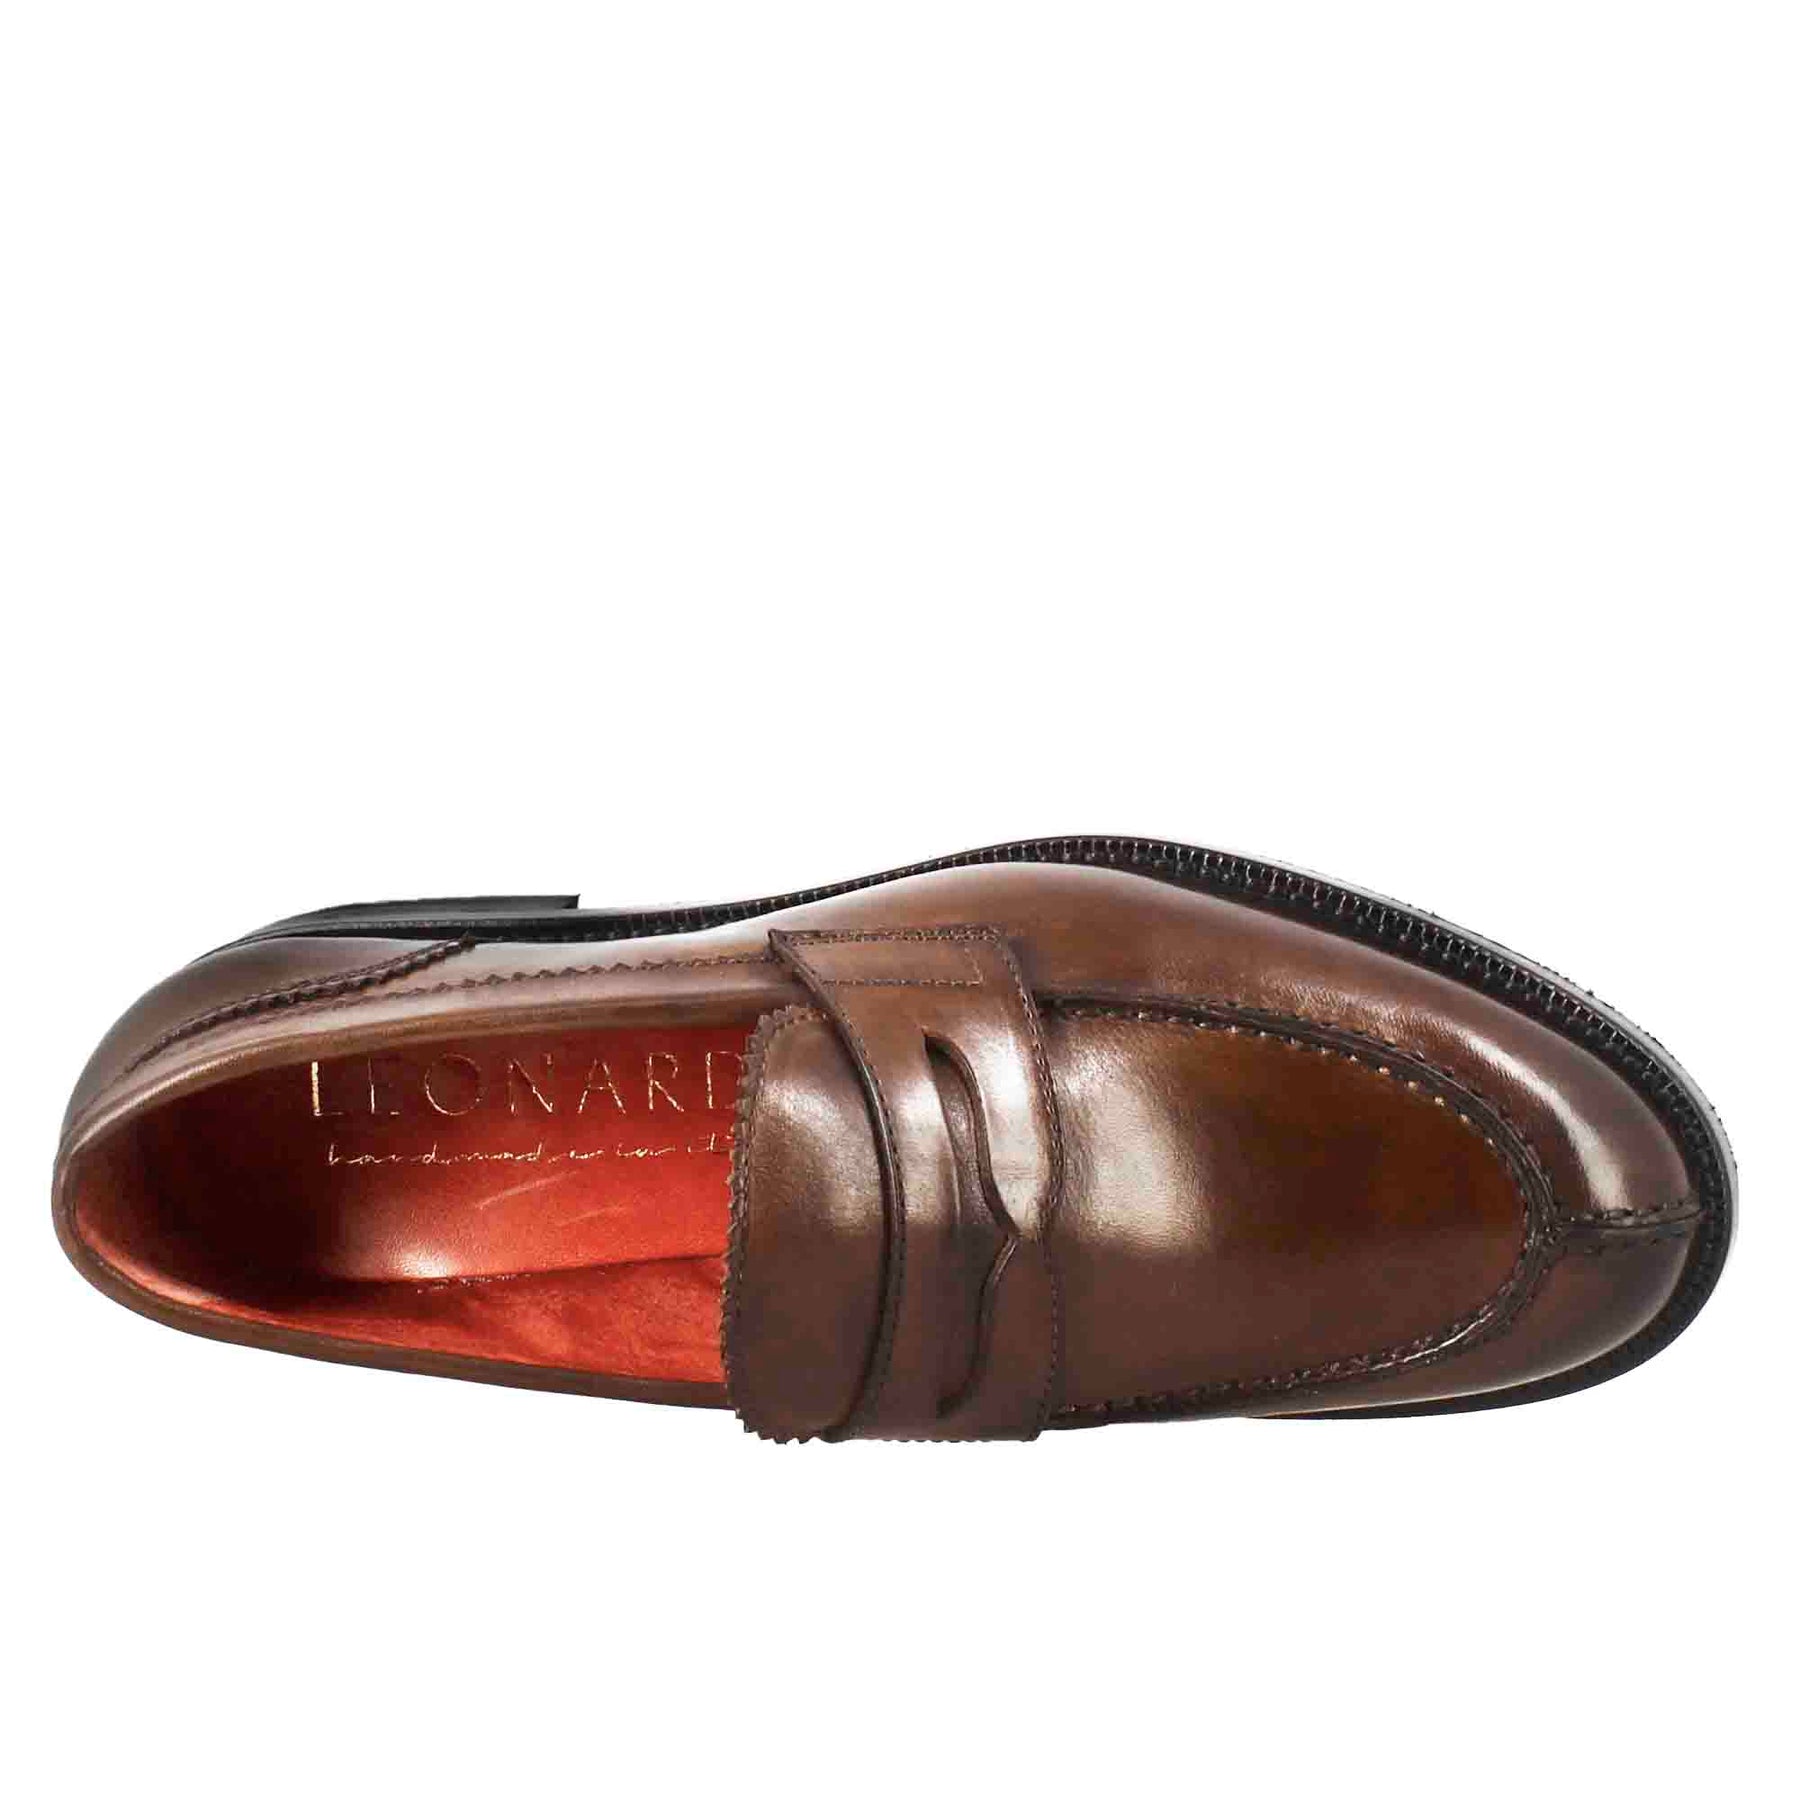 Women's moccasin with snapdragon in brown leather